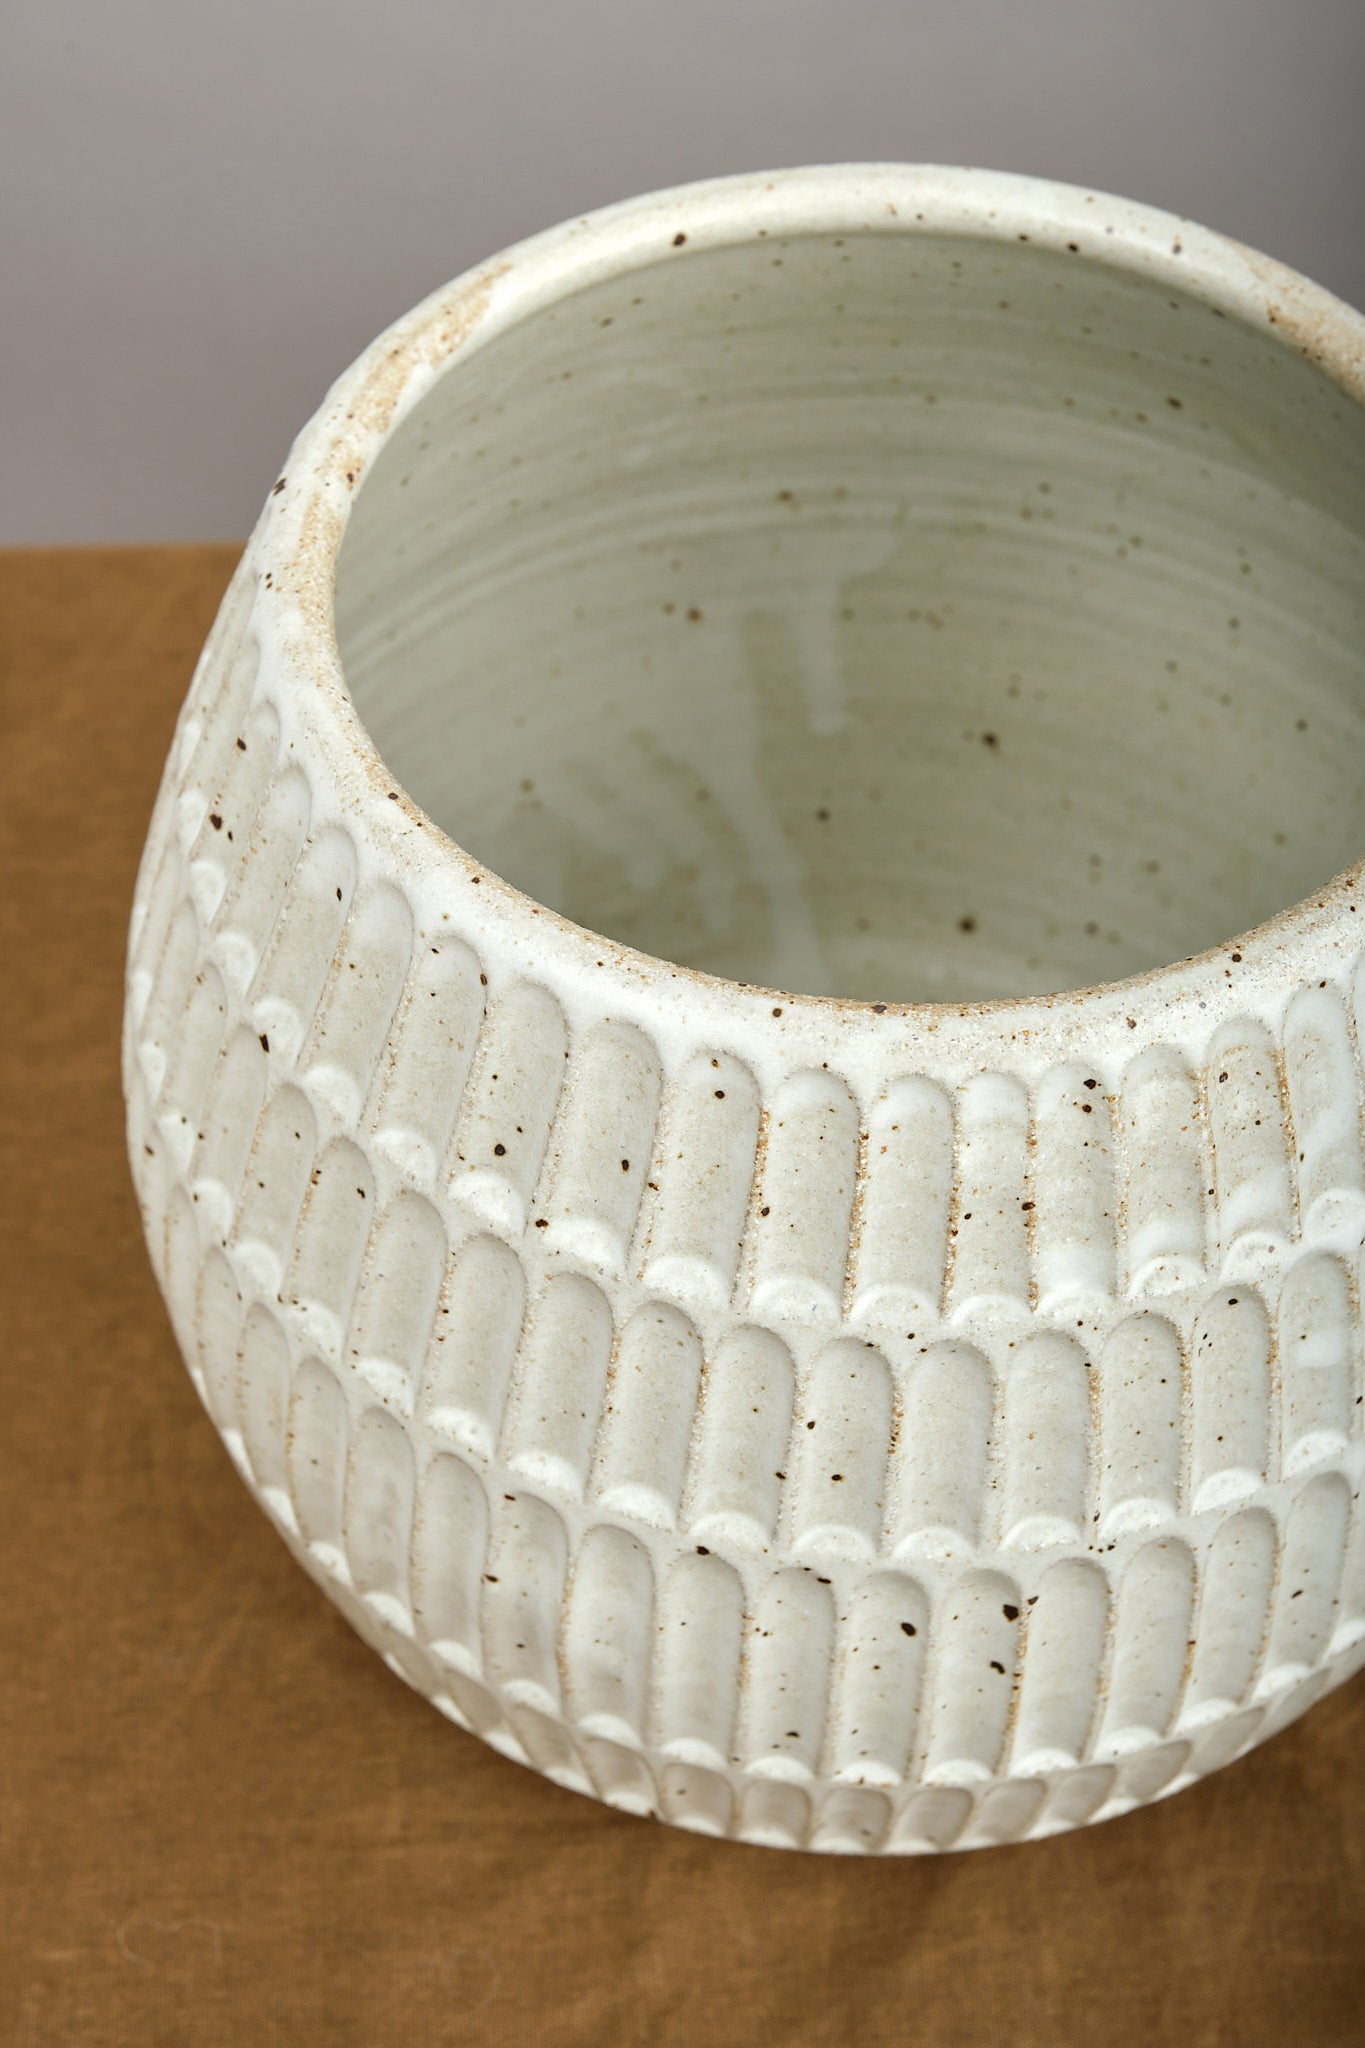 Mt. Washington Pottery Large Planter In speckled white